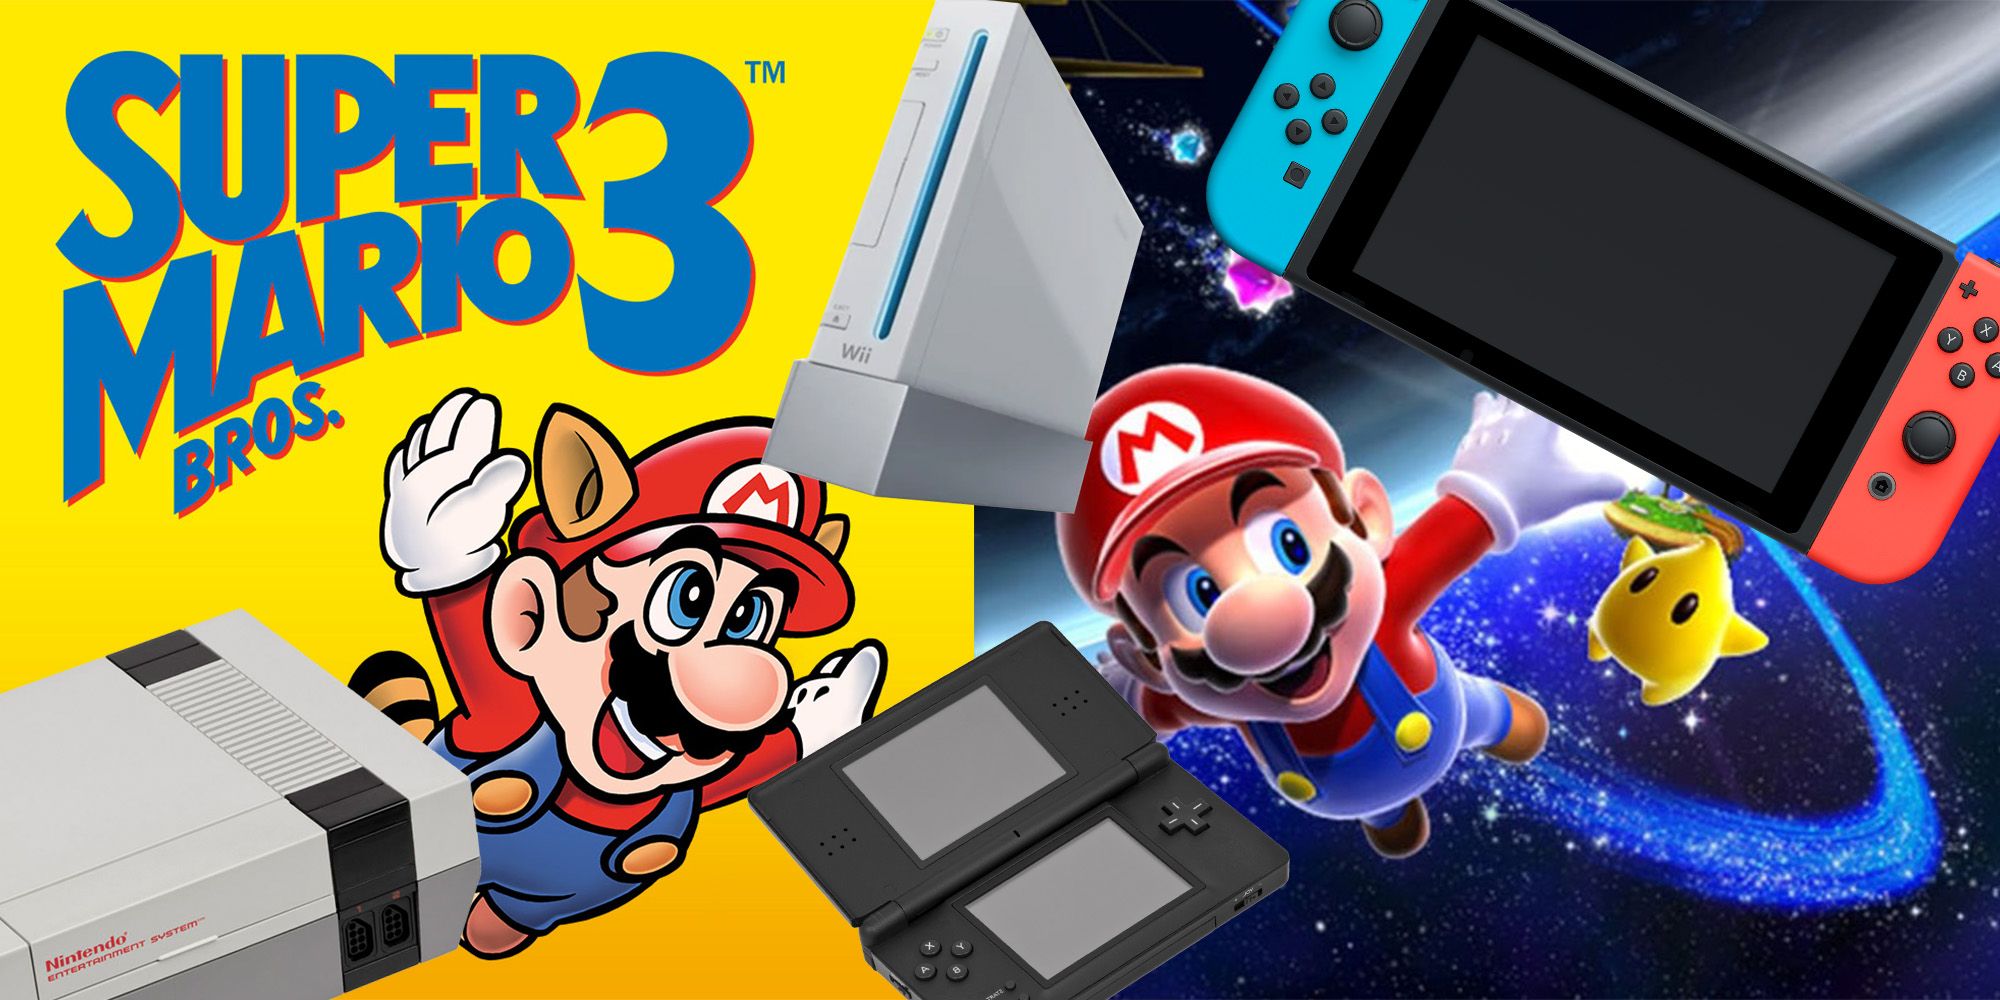 banner image for Mario bros 3; key art of Mario Galaxy; the NES, Wii, DS and Switch consoles